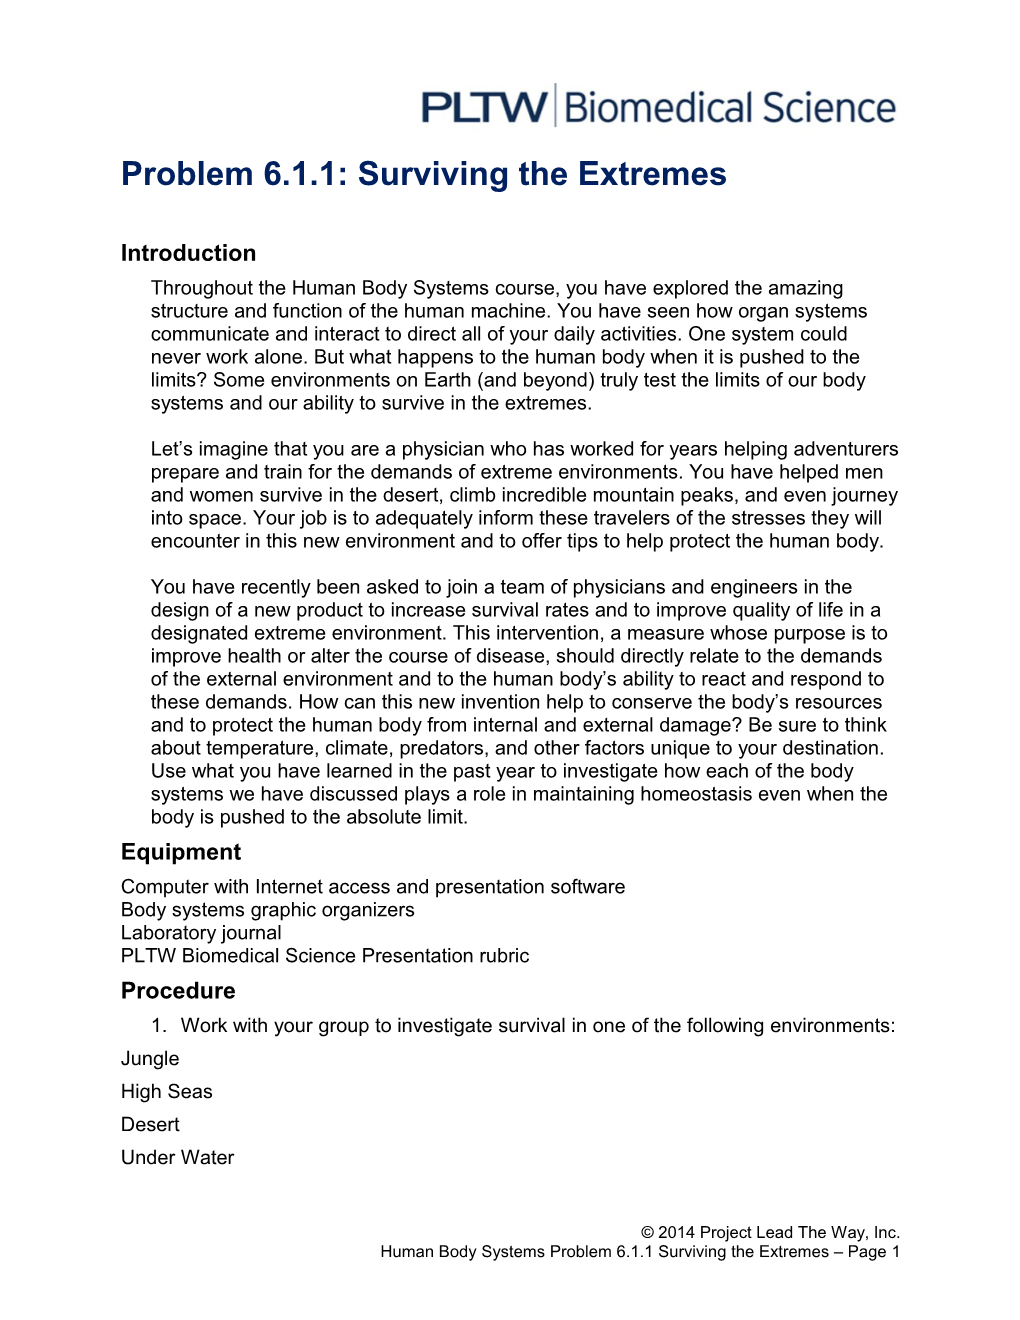 Problem 6.1.1: Surviving the Extremes